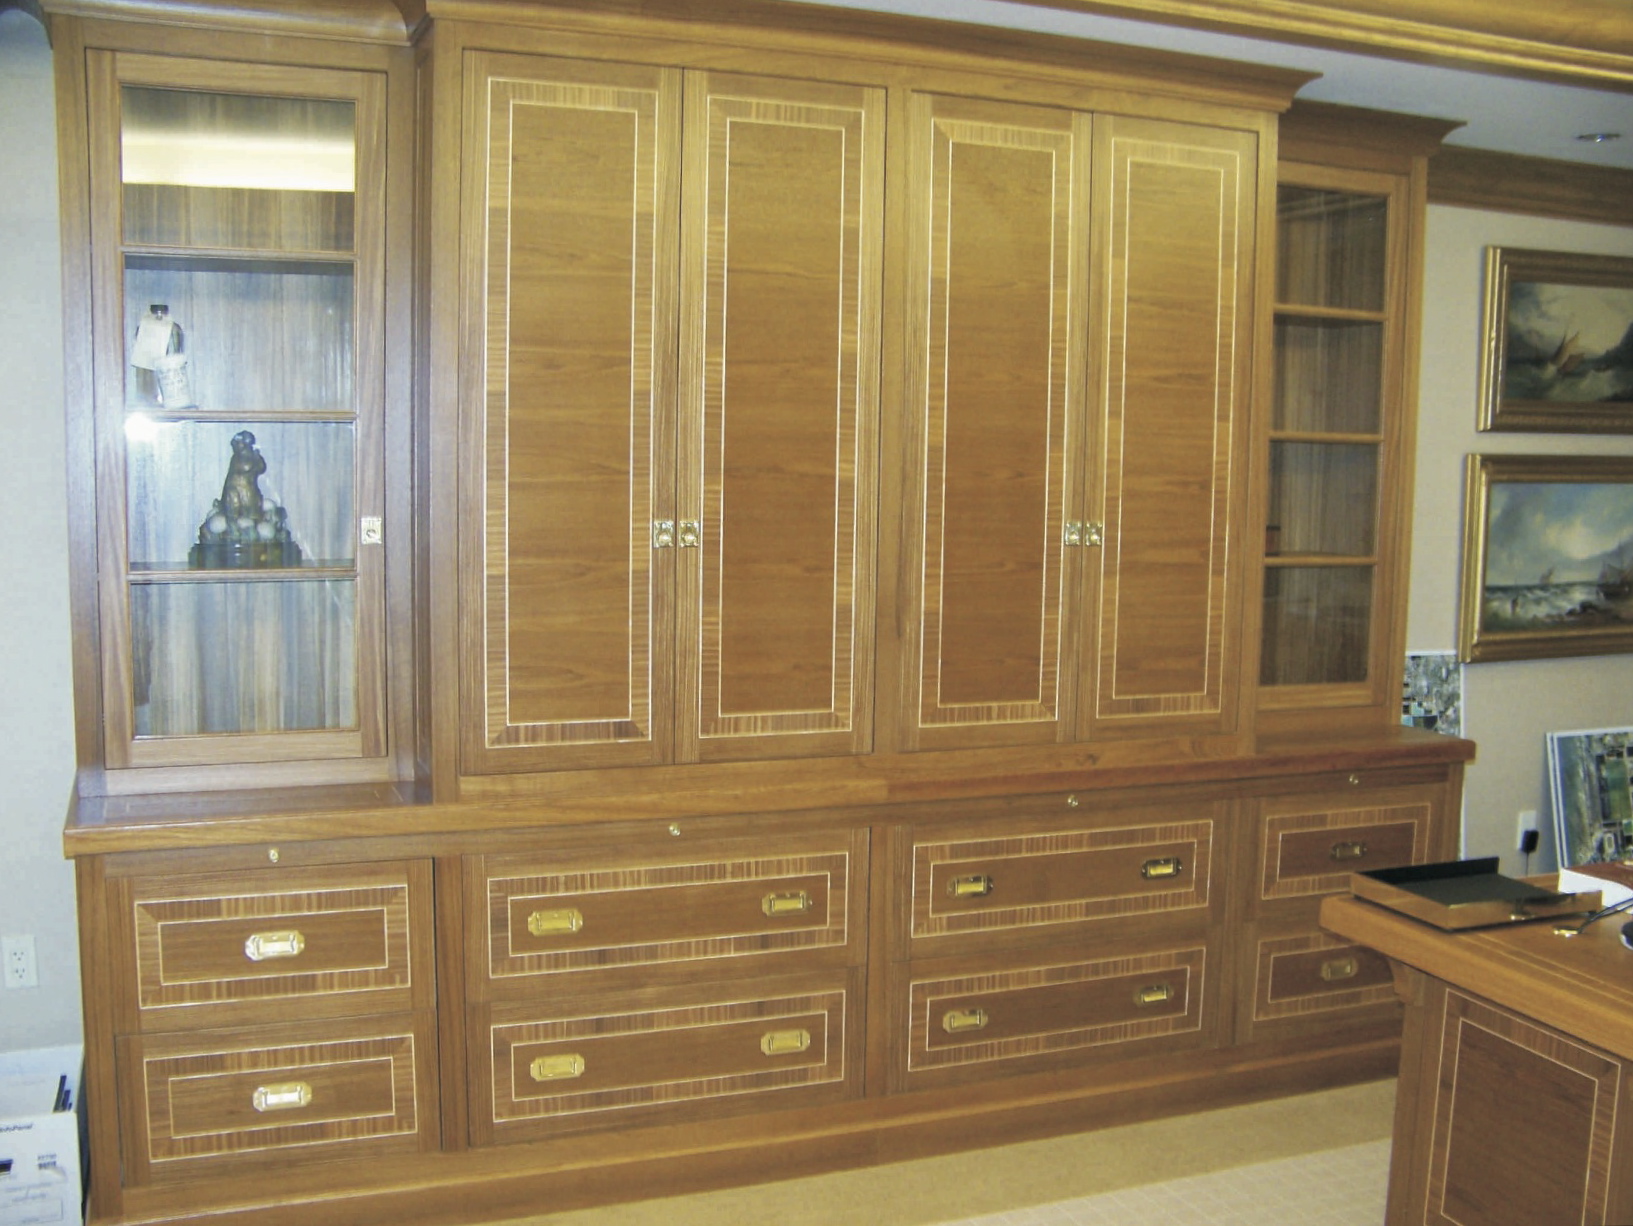 Corporate office credenza, view 2 - West Palm Beach